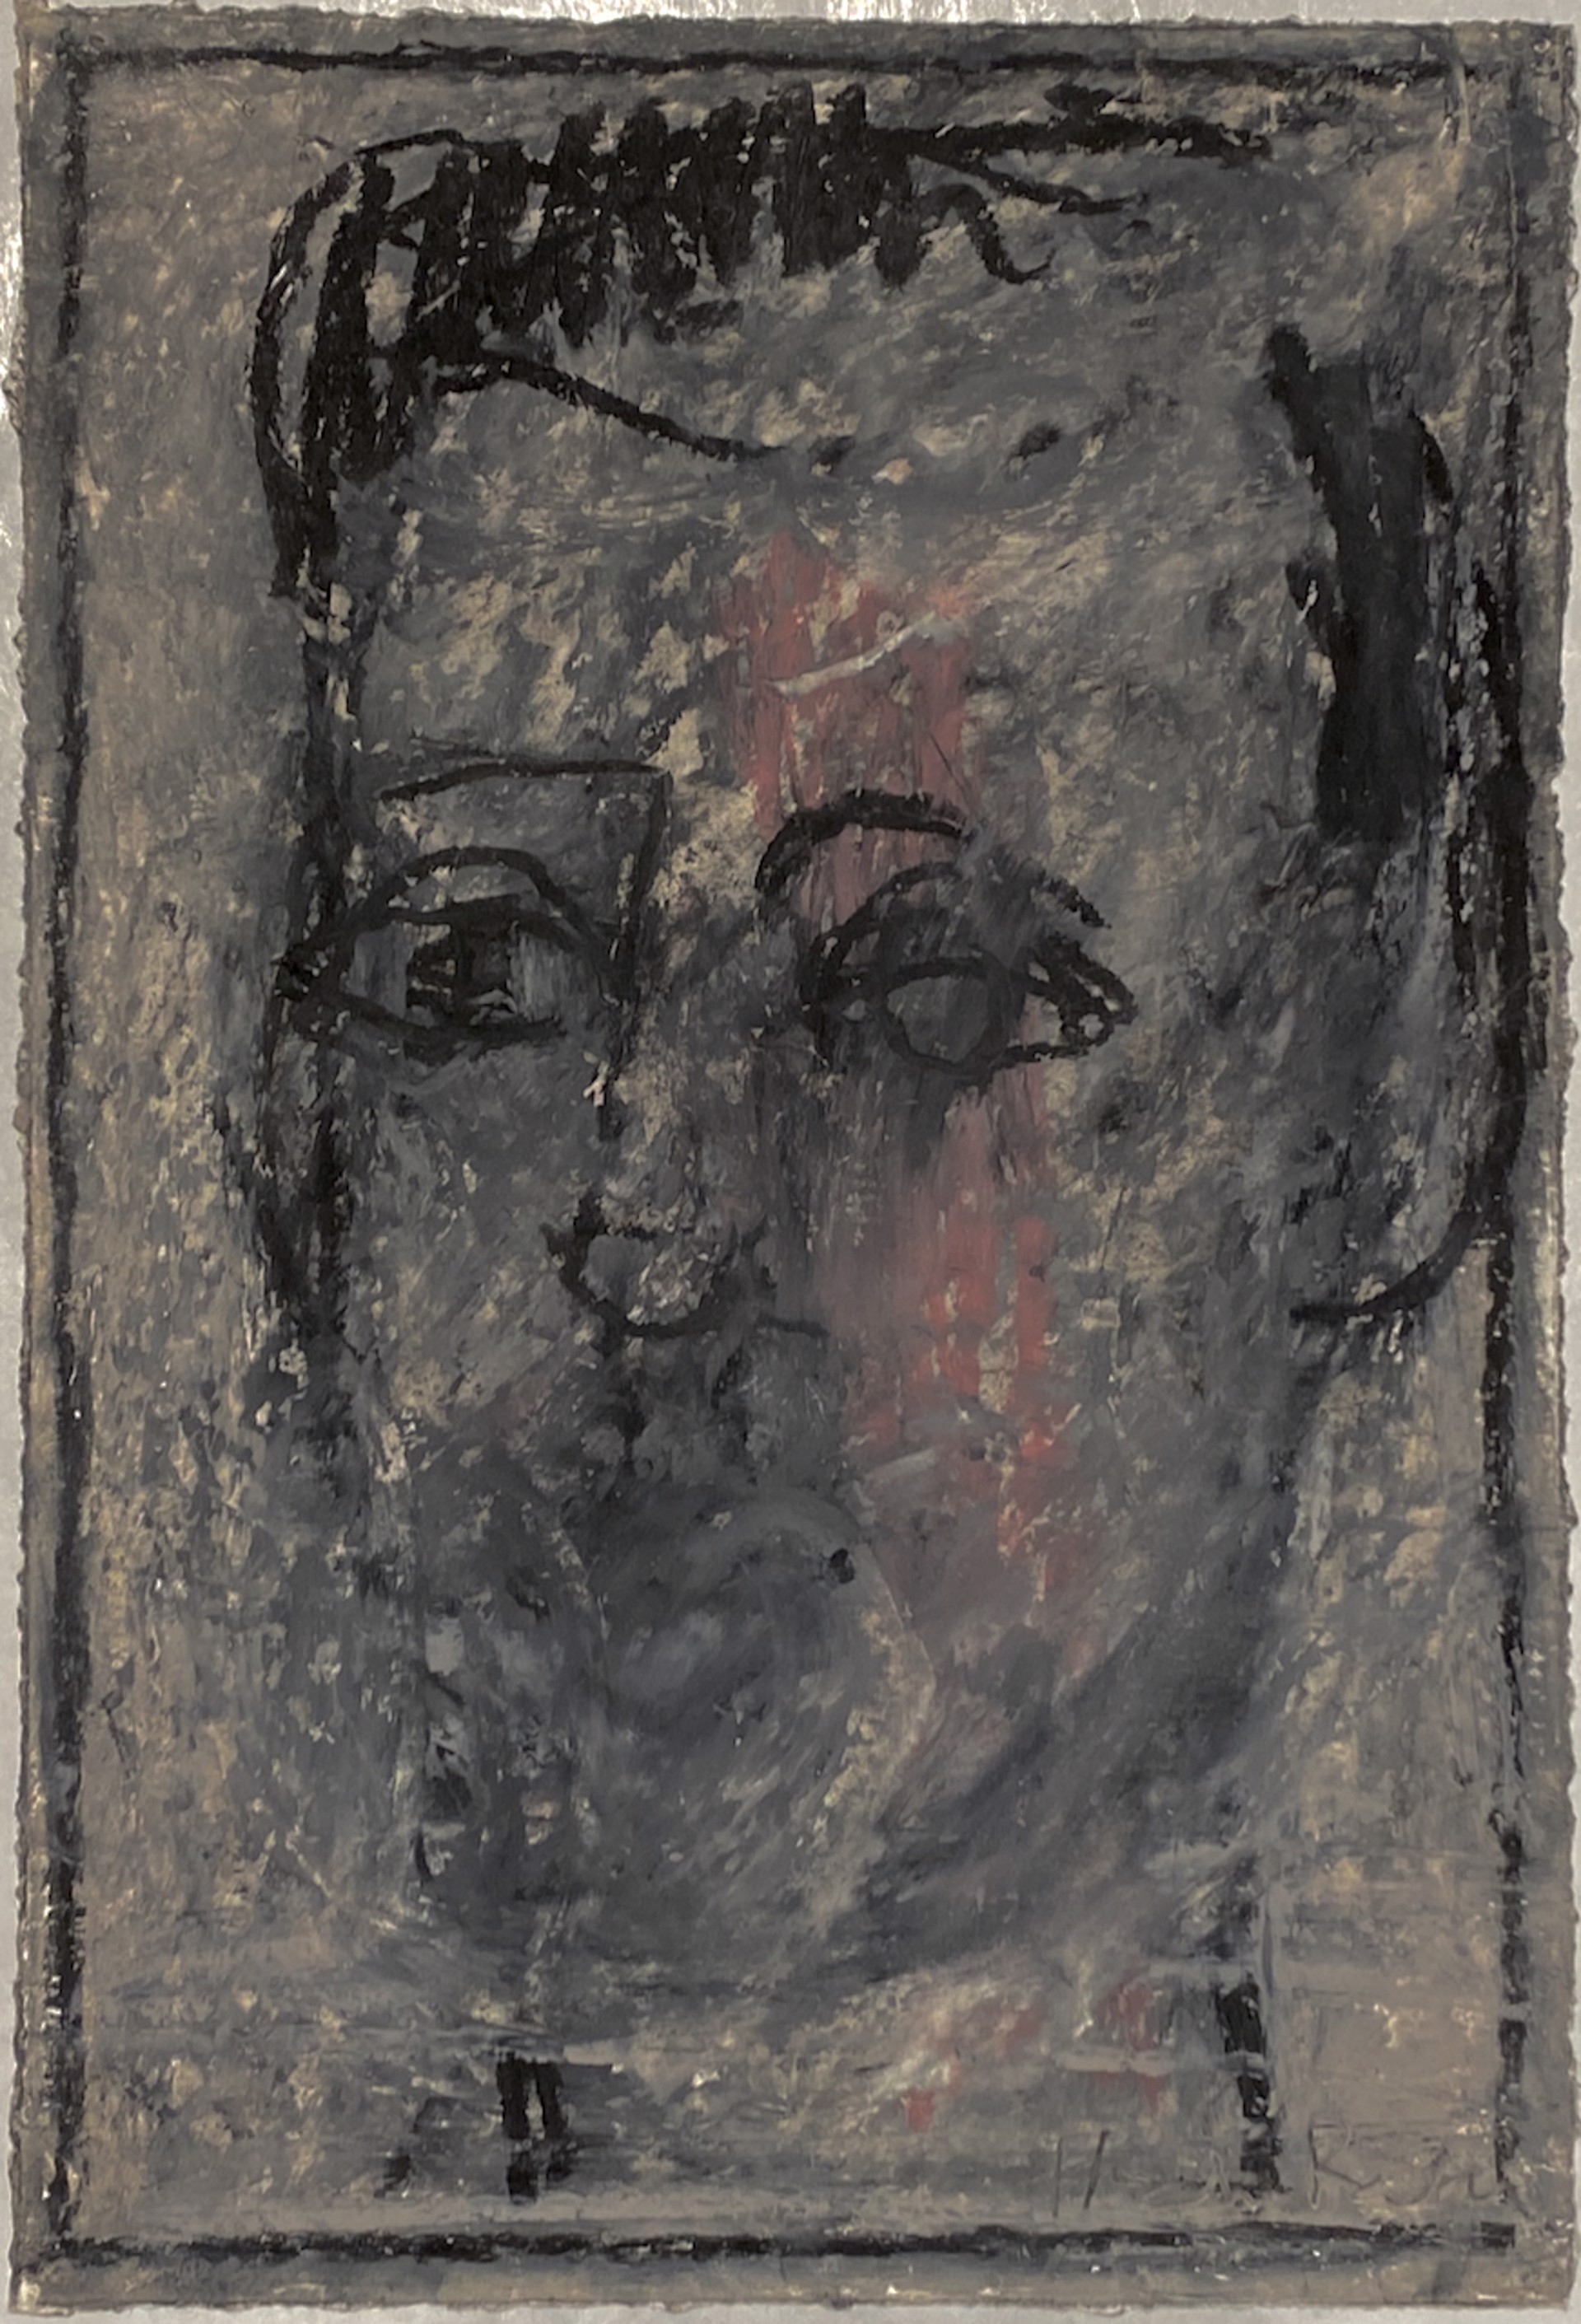 Drawings from Mt Gretna: Head VII by Thaddeus Radell